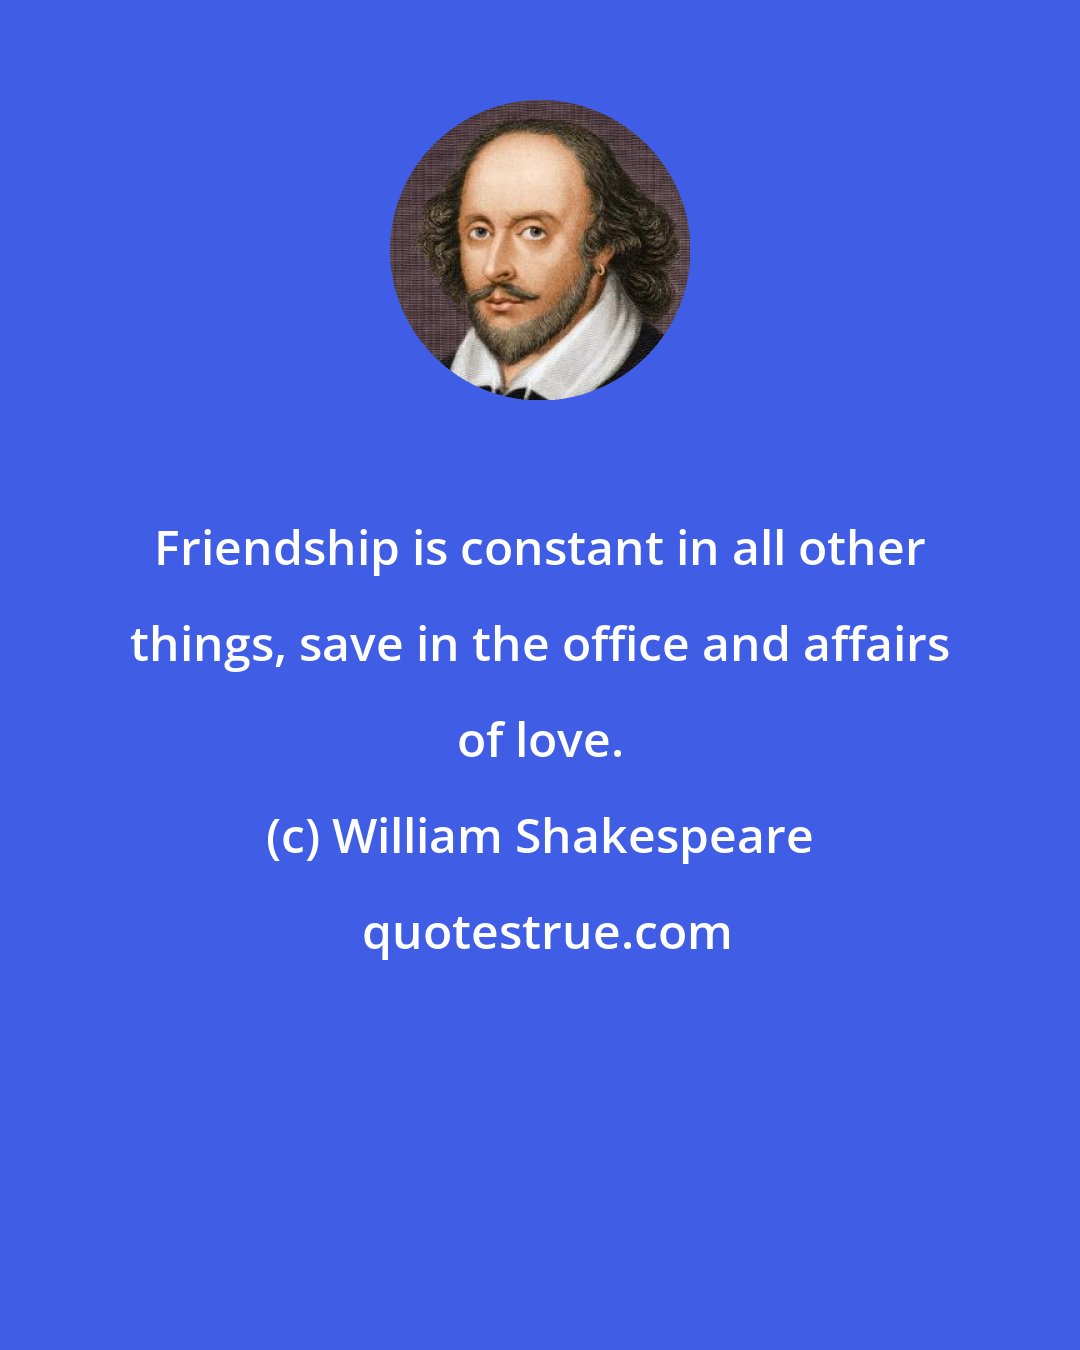 William Shakespeare: Friendship is constant in all other things, save in the office and affairs of love.